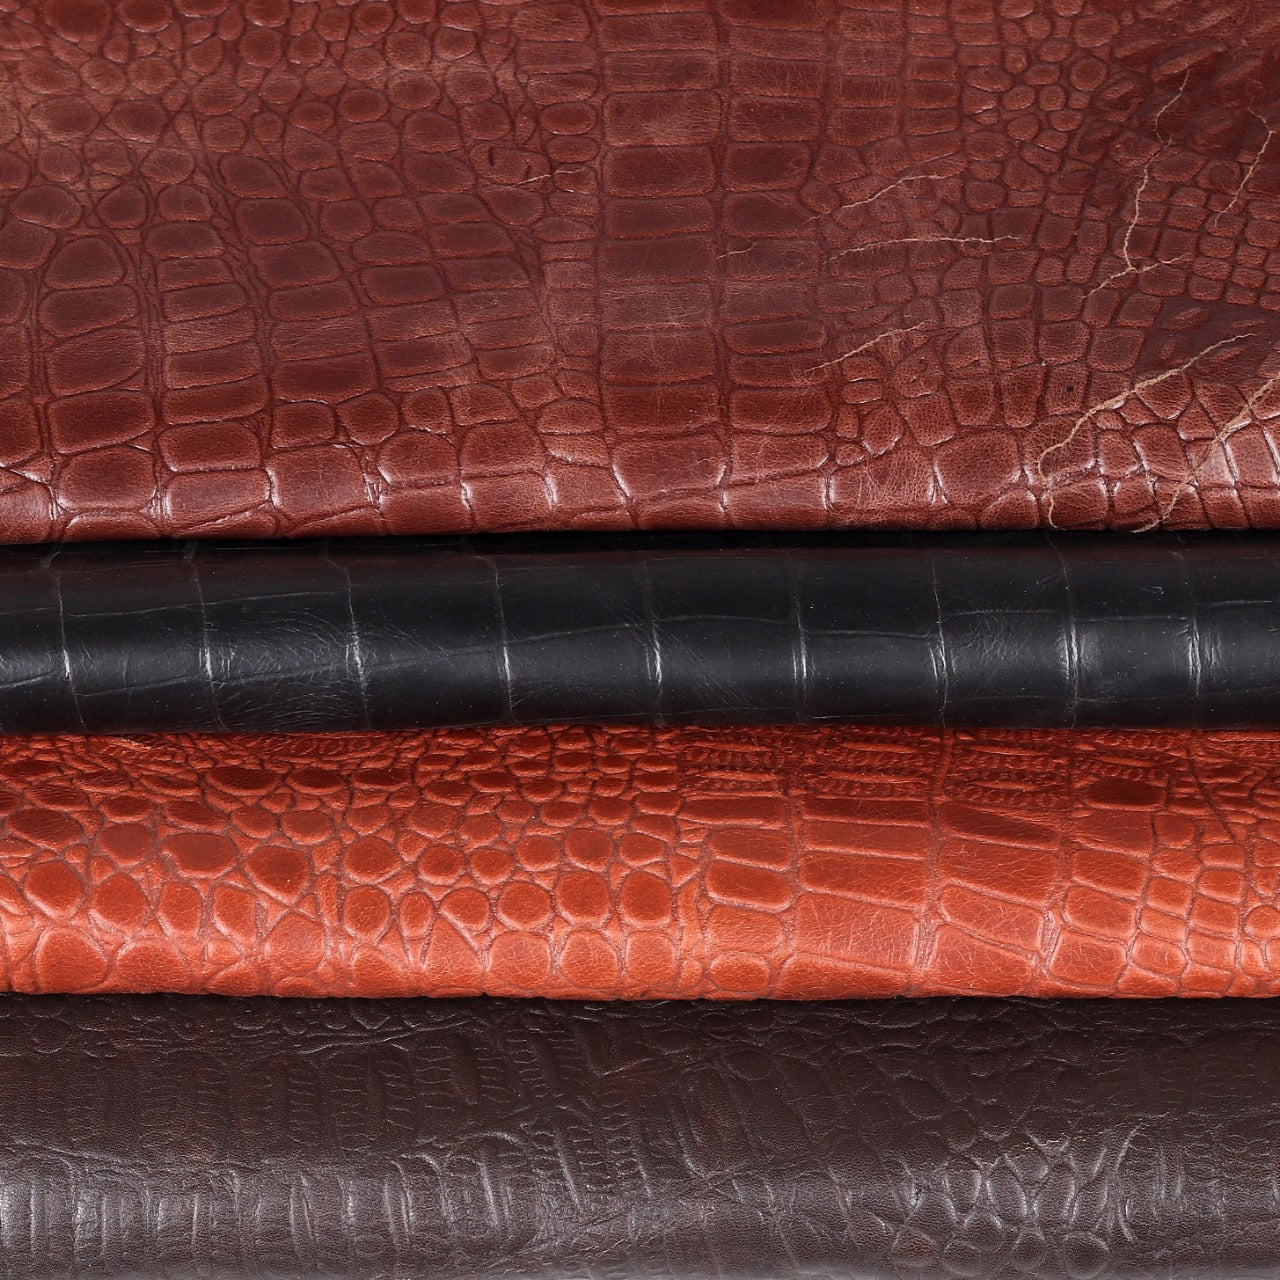 DIFFERENT TYPES OF REAL LEATHERS